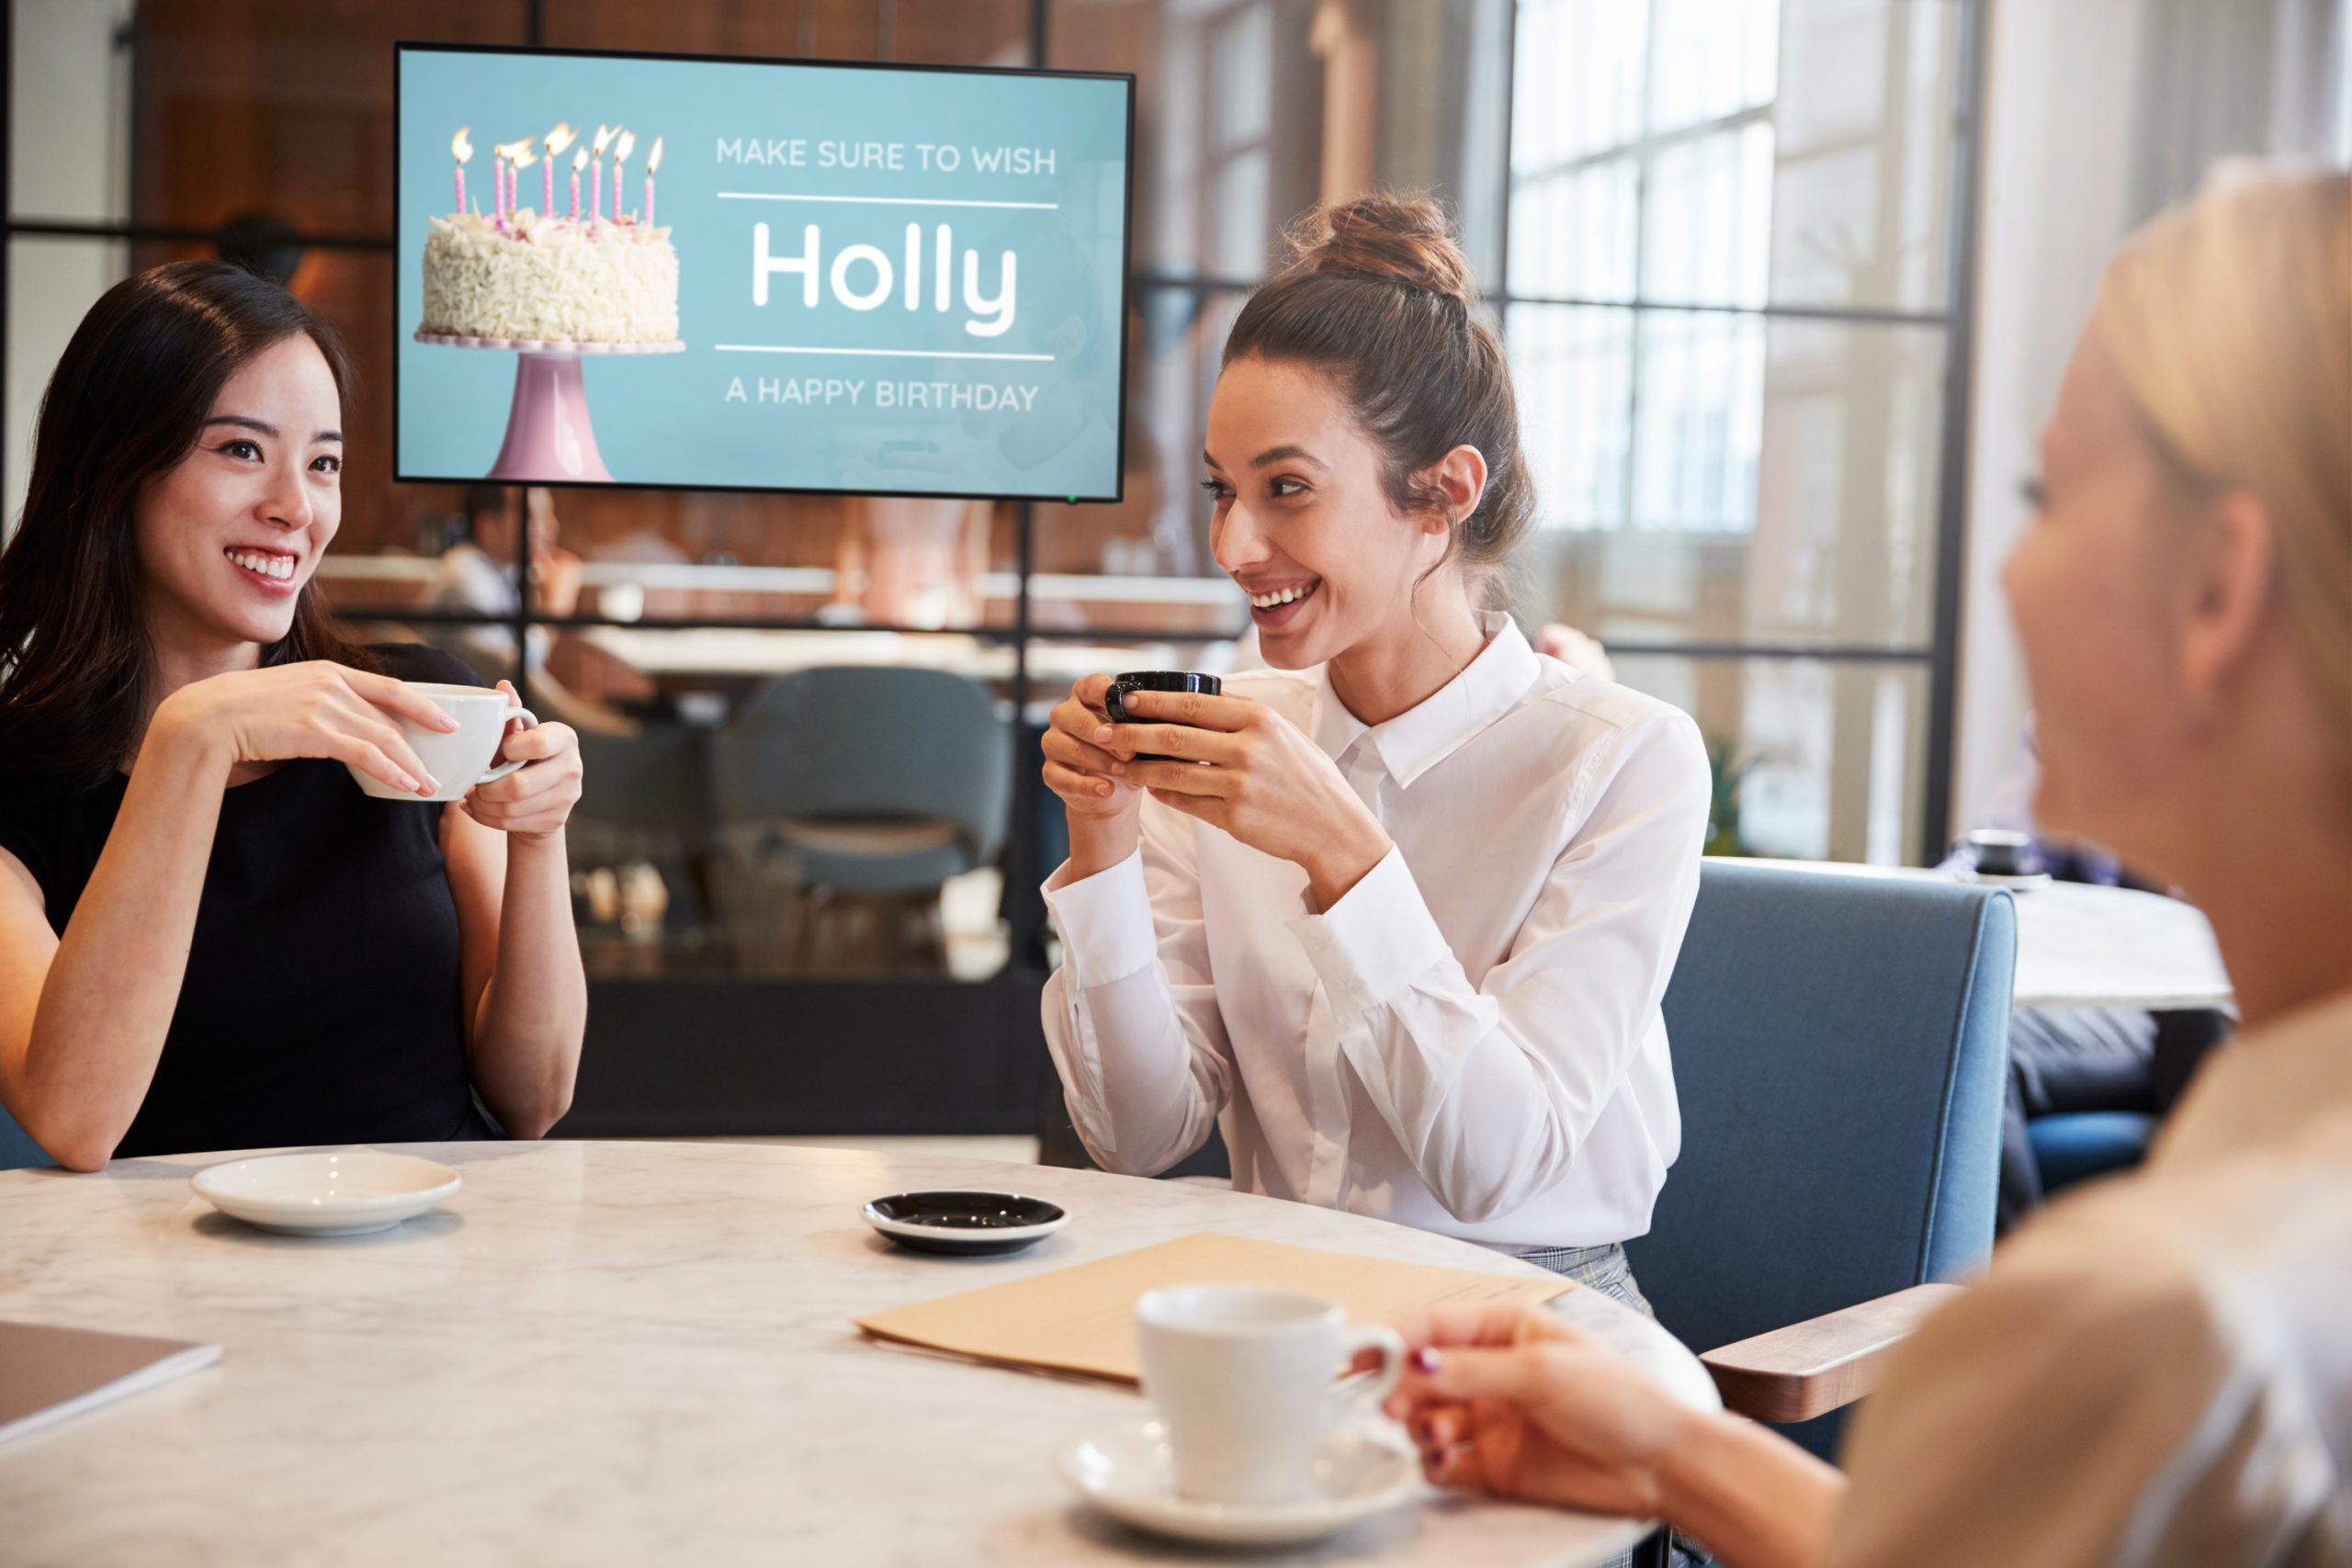 Three female coworkers sit around a table having coffee, a digital sign is in the background that reads "don't forget to wish Holly a happy birthday".